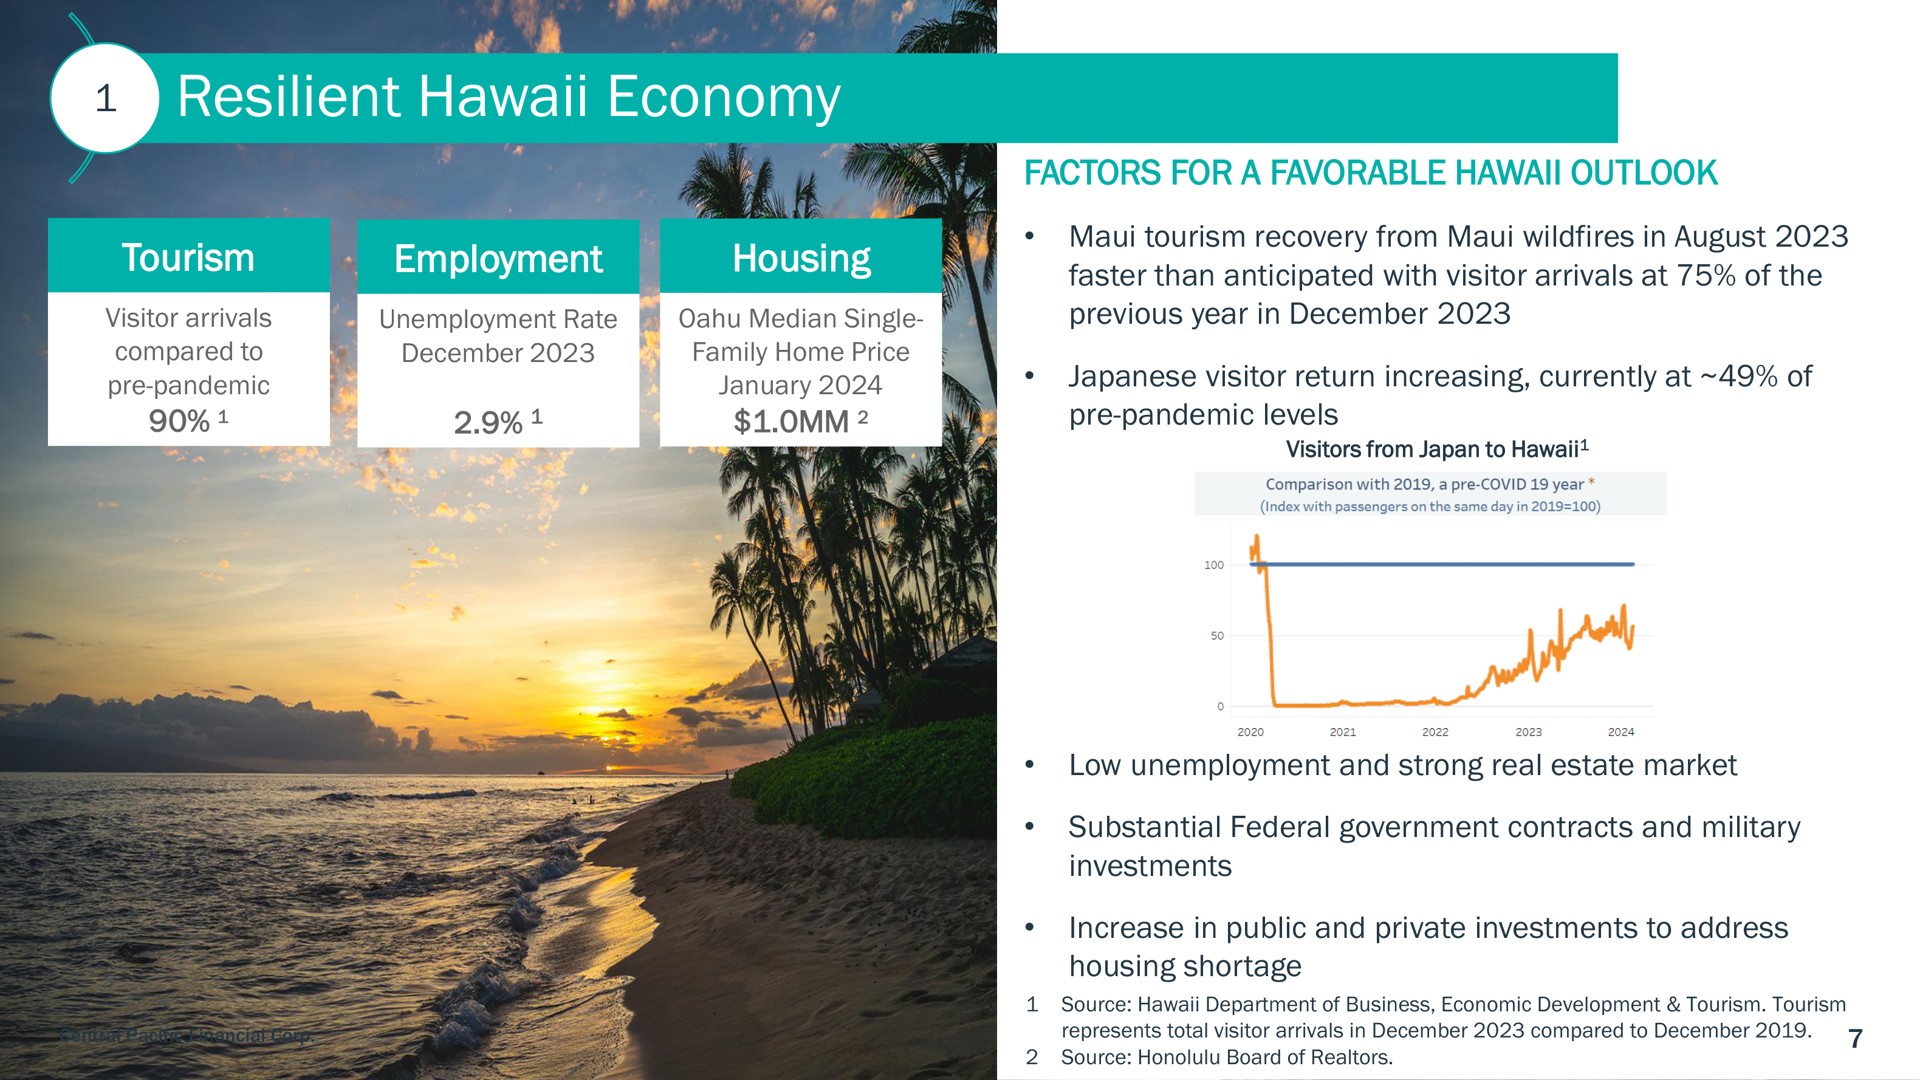 resilient economy | Central Pacific Financial